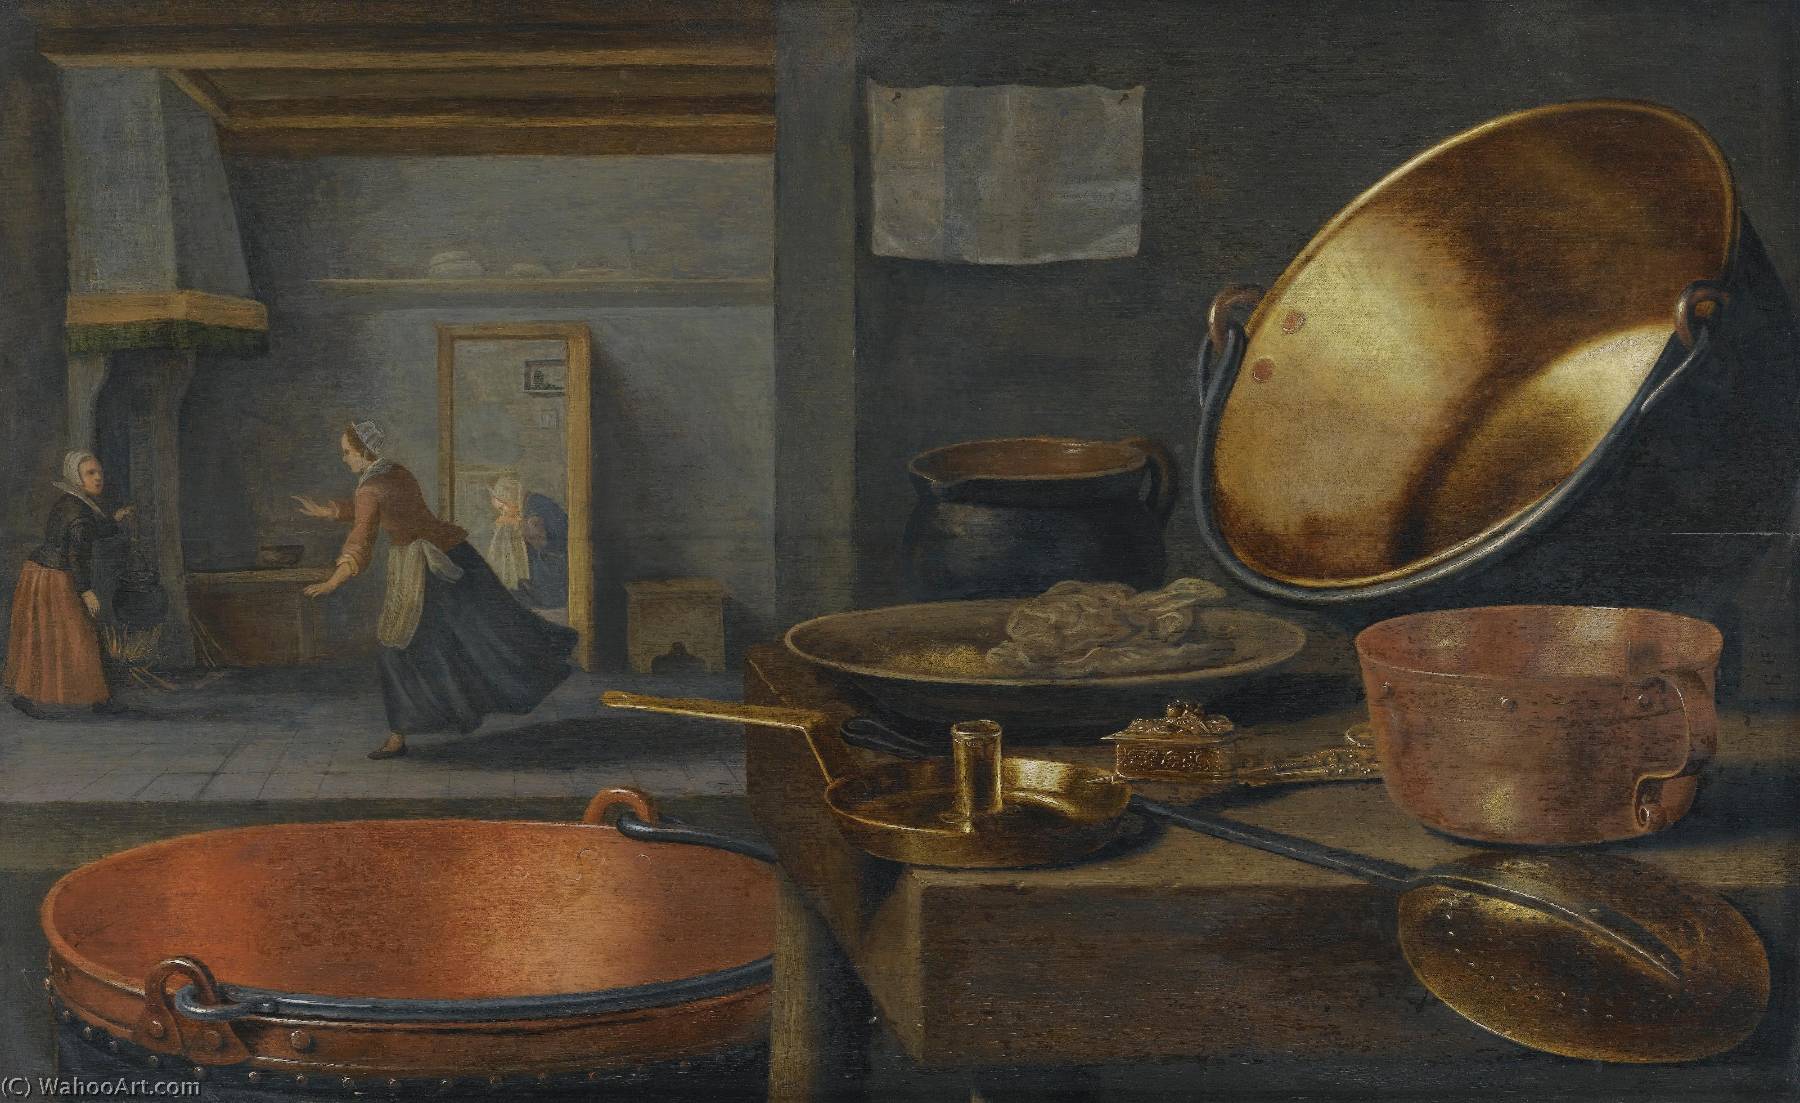 Wikioo.org - สารานุกรมวิจิตรศิลป์ - จิตรกรรม Floris Van Schooten - a Kitchen Still Life with pots and pans on a stone ledge and animated figures in the background